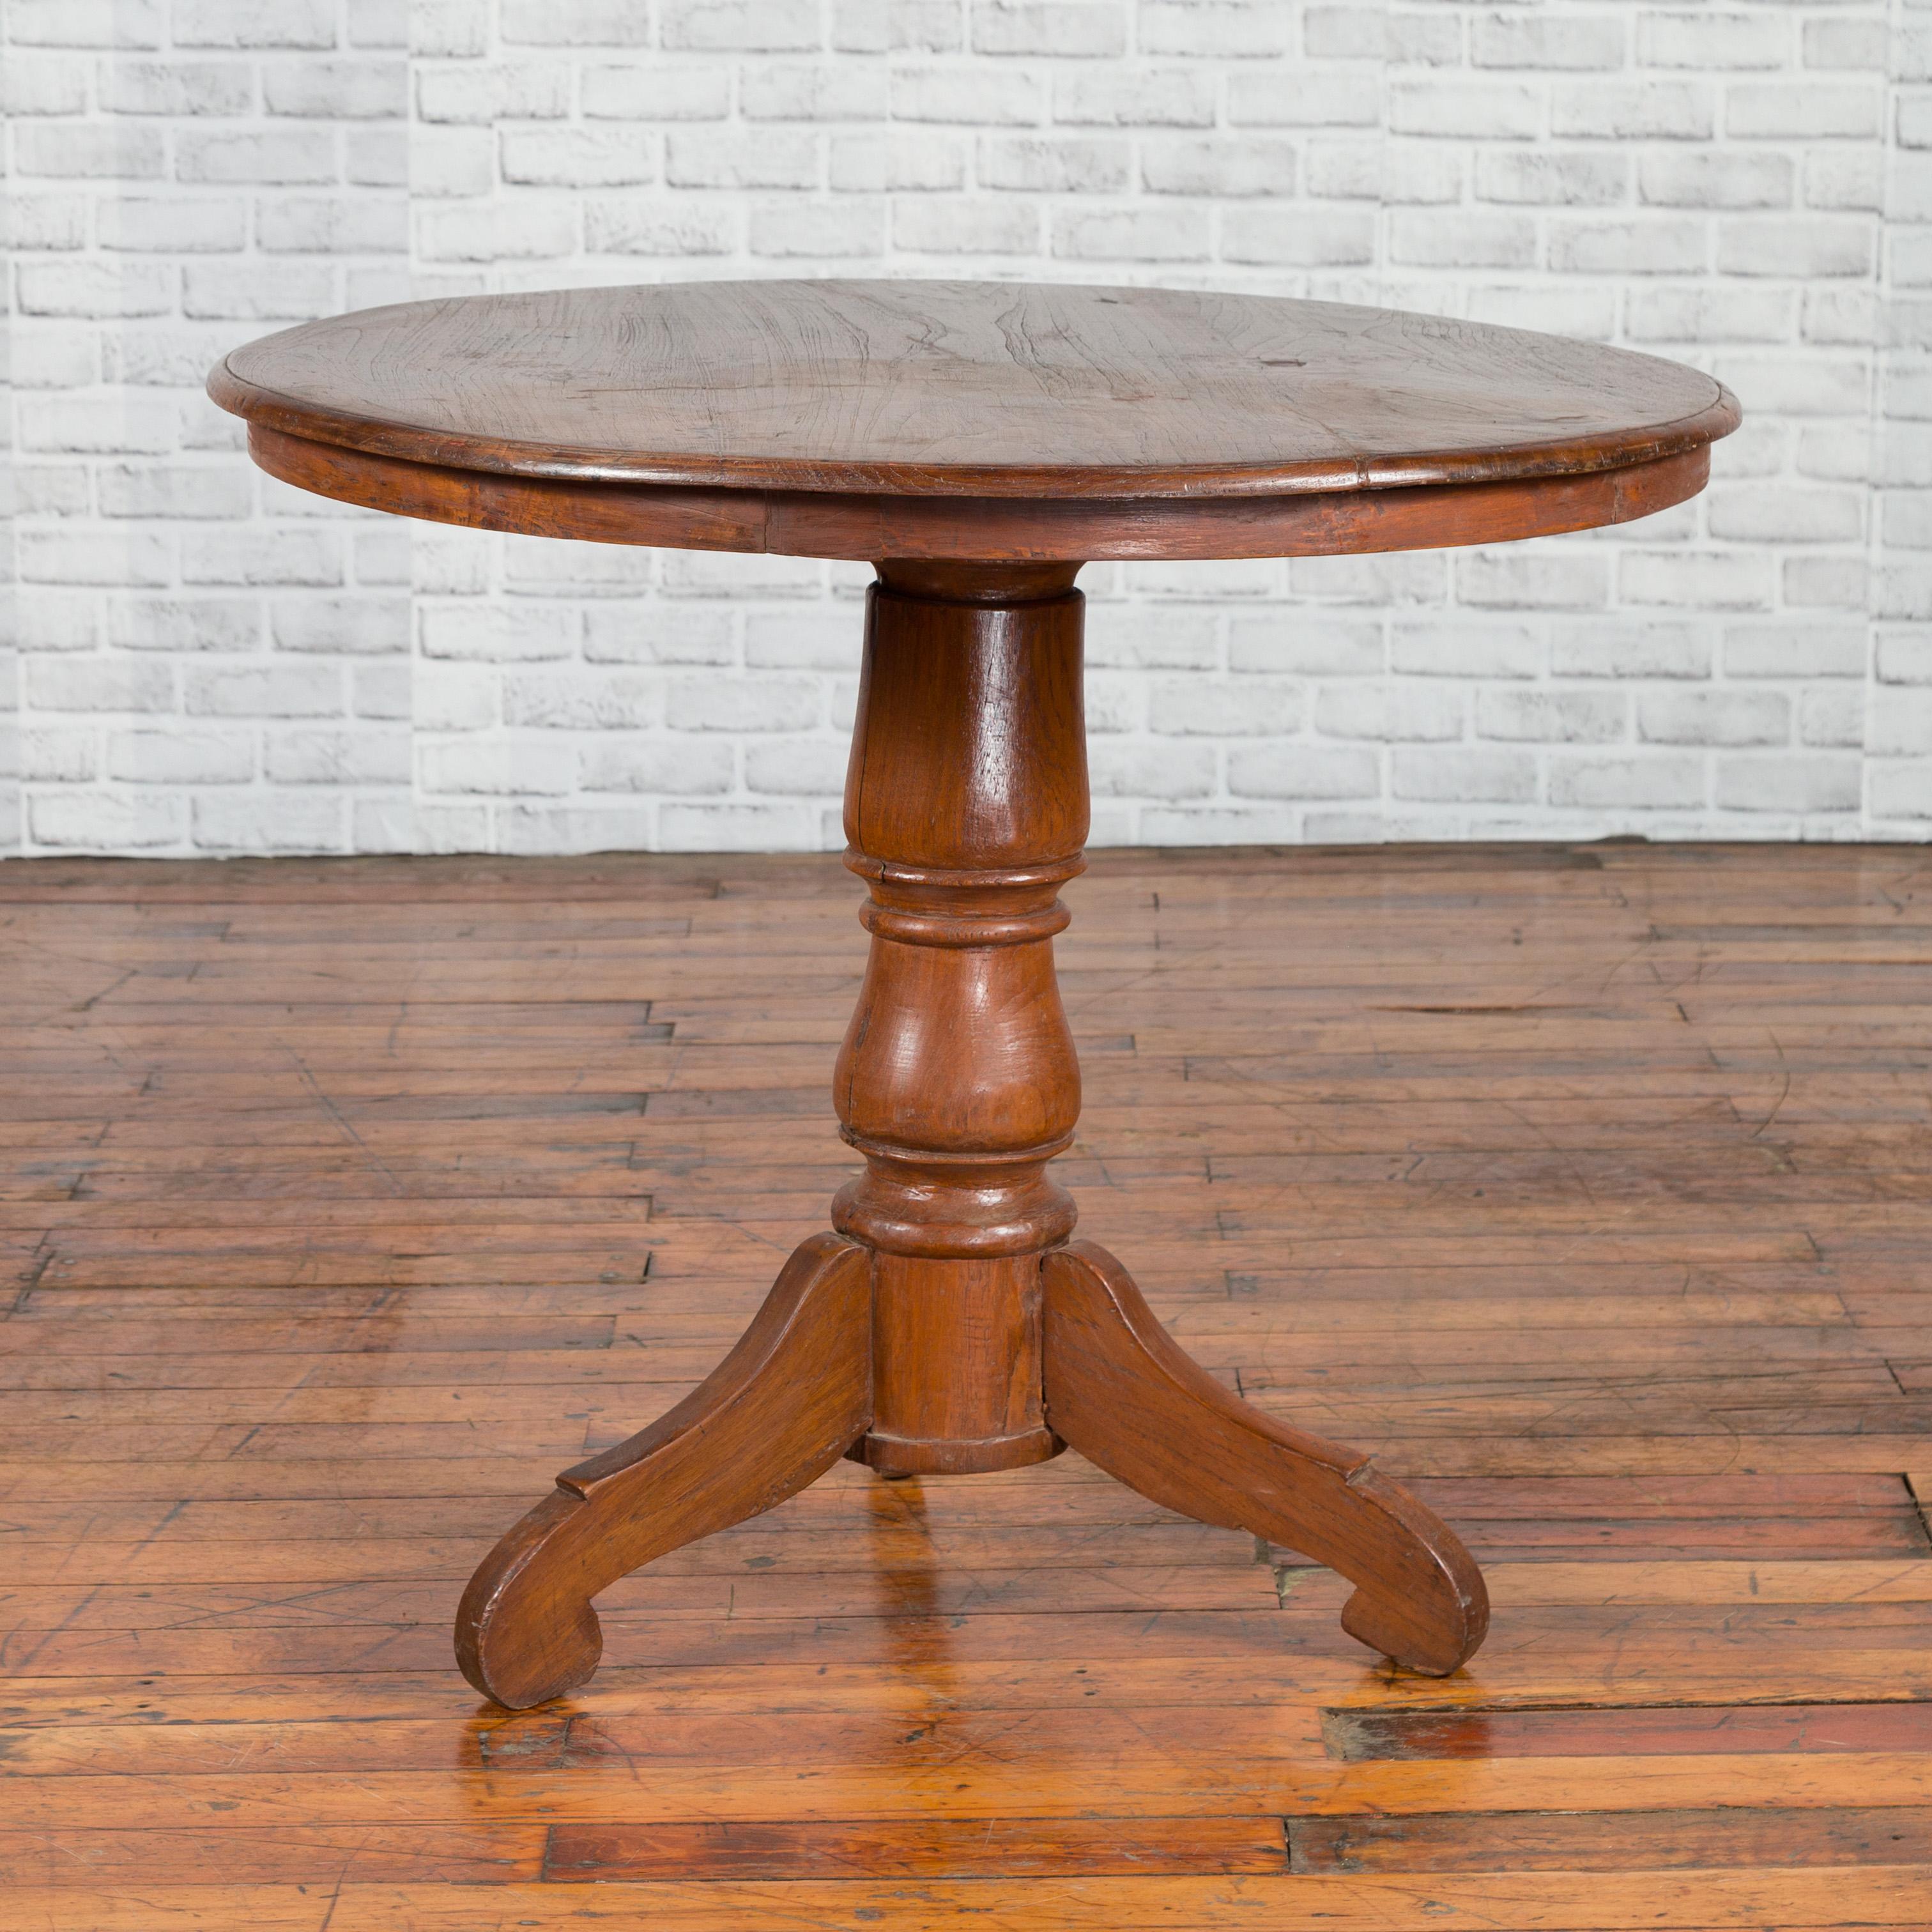 A vintage Indonesian Dutch Colonial round table from the mid-20th century, with pedestal and tripod base. Created during the Dutch Colonial period, this side table features a circular top sitting above a turned pedestal resting on three scrolling